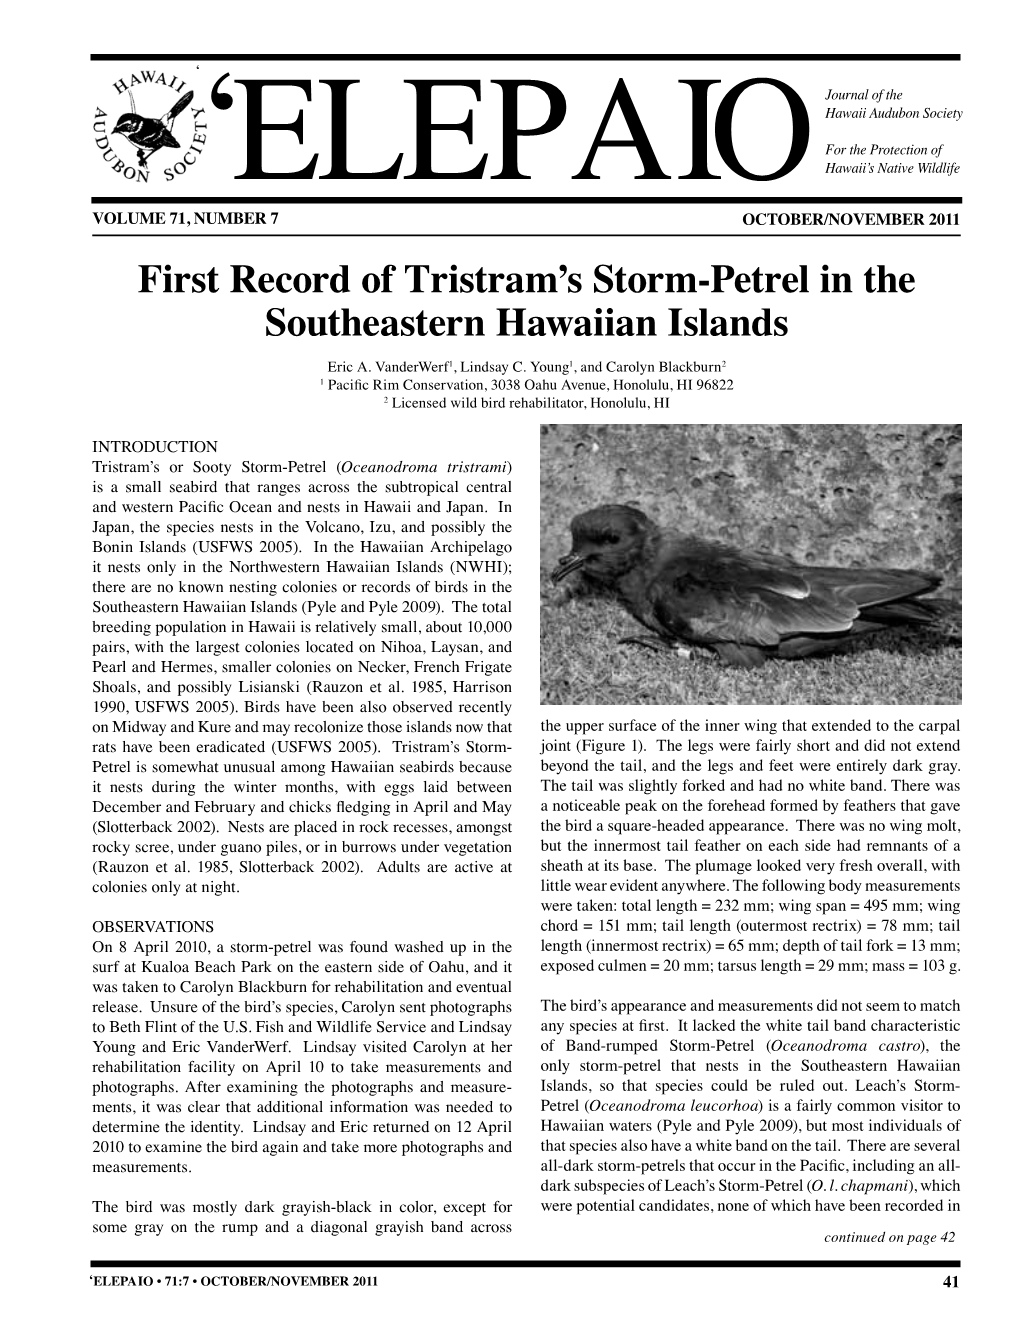 First Record of Tristram's Storm-Petrel in the Southeastern Hawaiian Islands